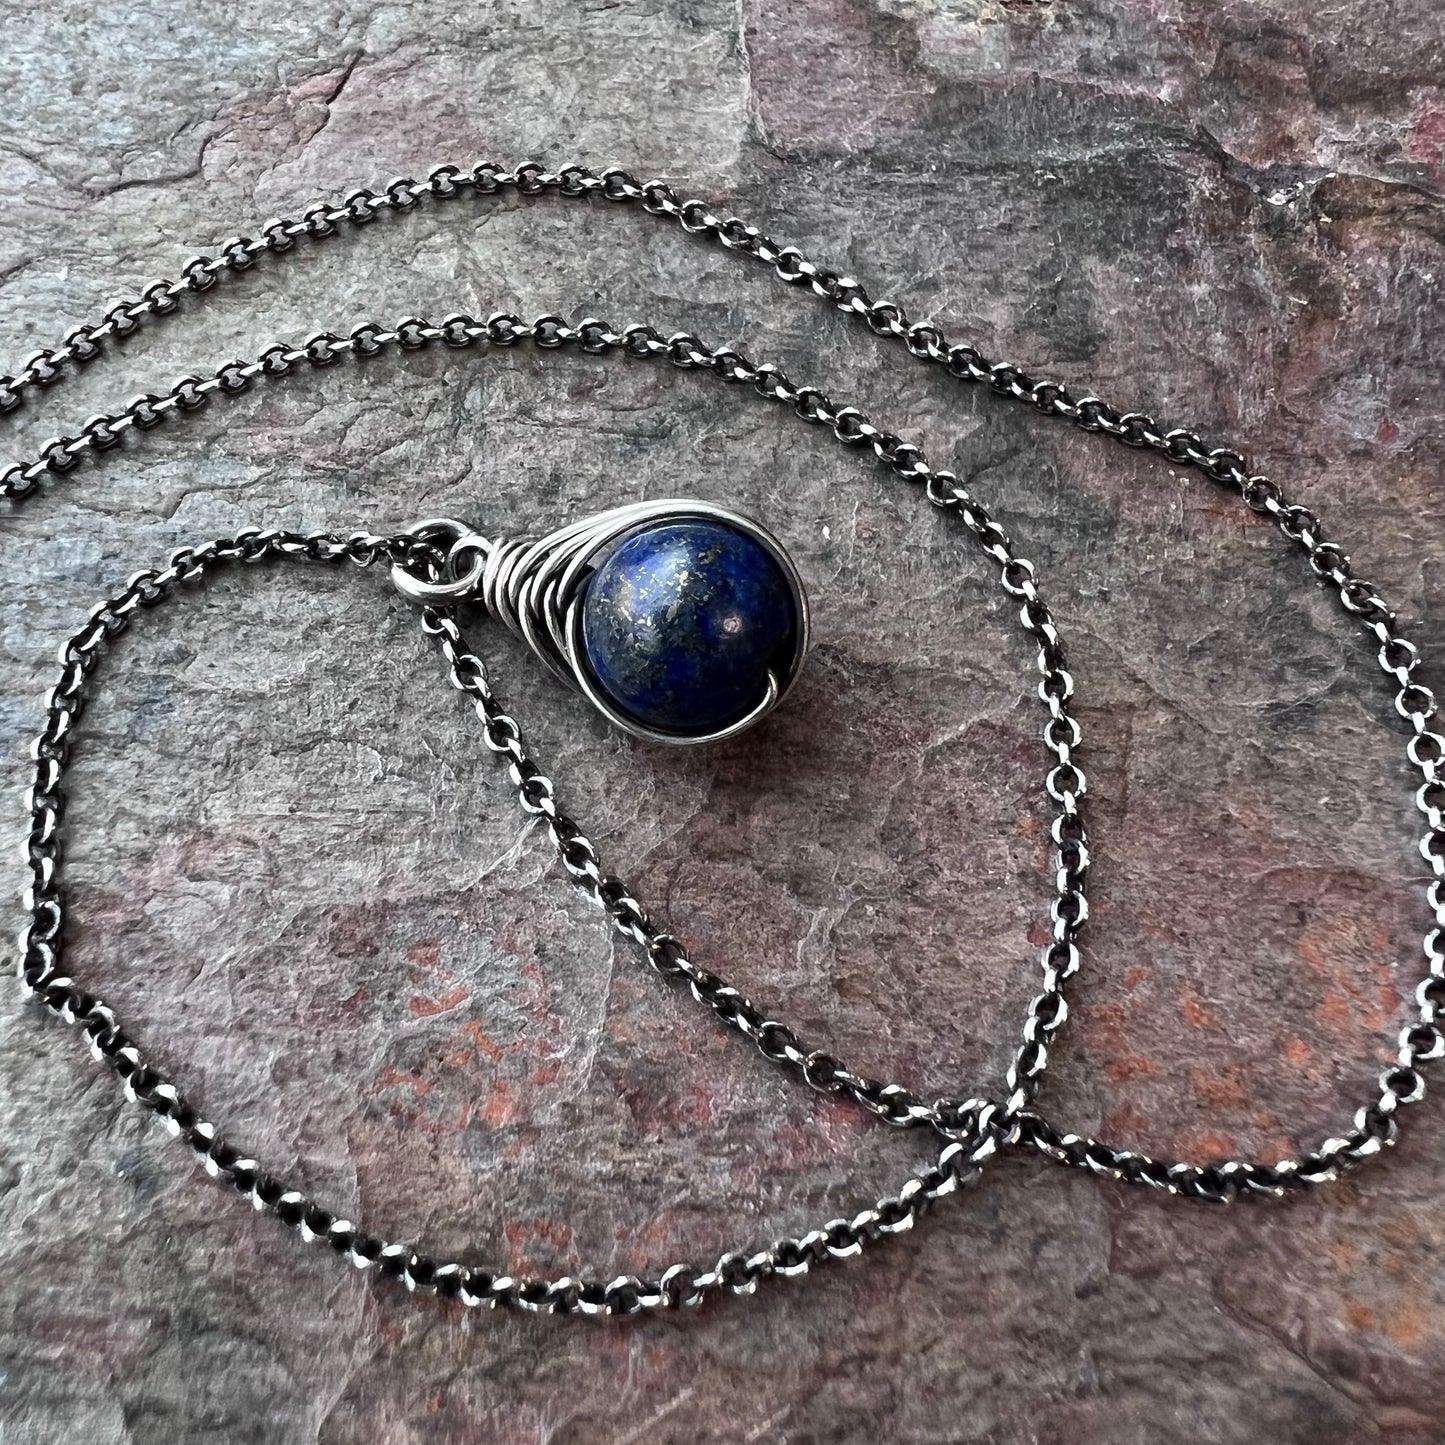 Lapis Lazuli Sterling Silver Necklace - Wire-wrapped Lapis Lazuli Pendant on Sterling Silver Chain